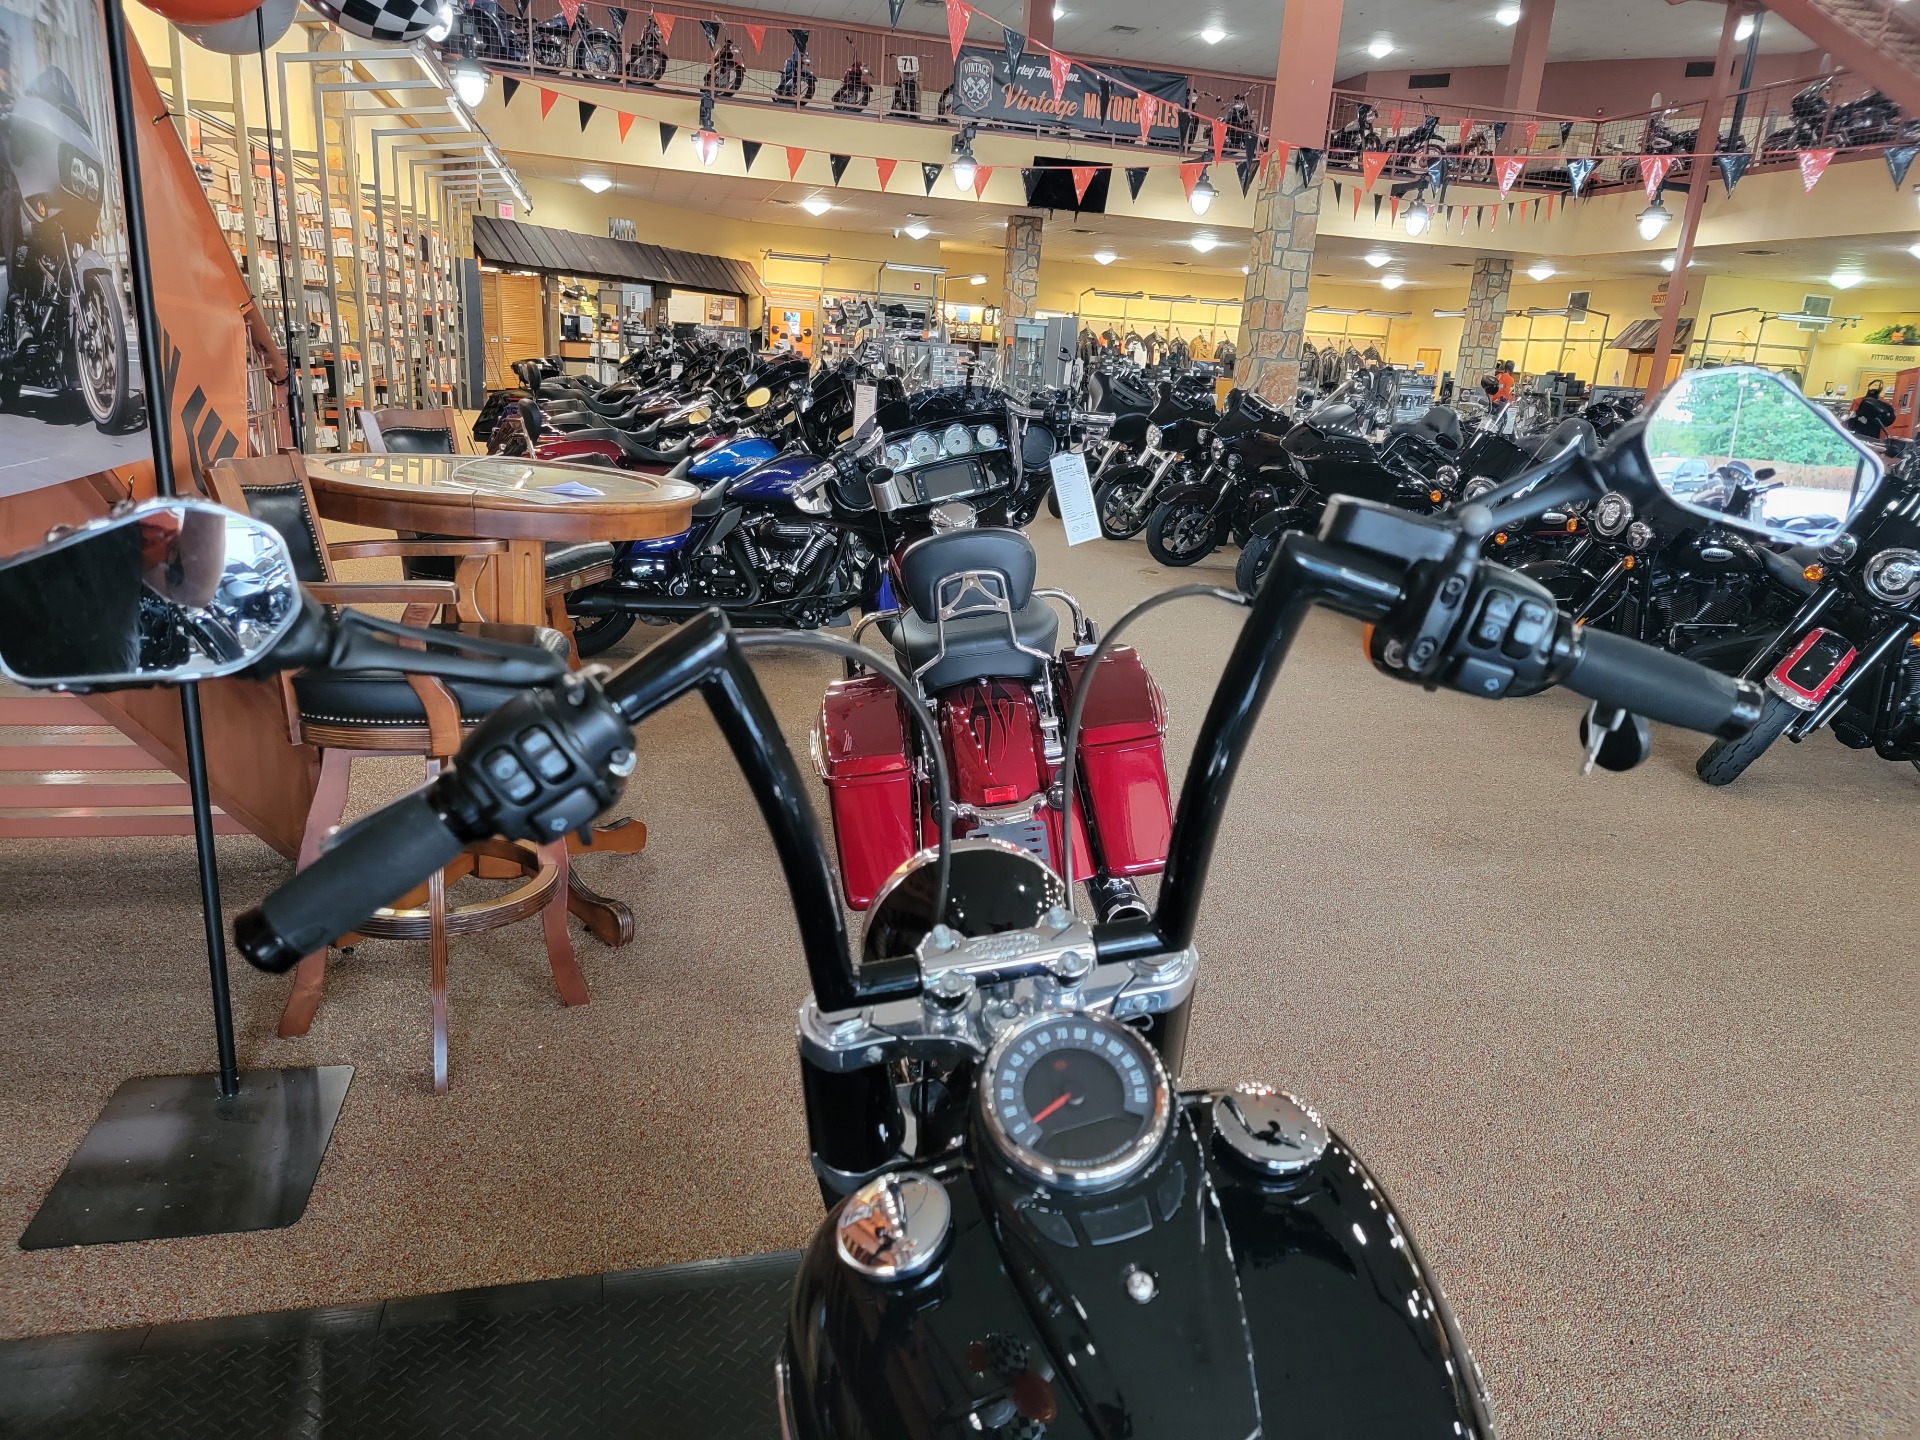 2021 Harley-Davidson Softail Slim® in Knoxville, Tennessee - Photo 6